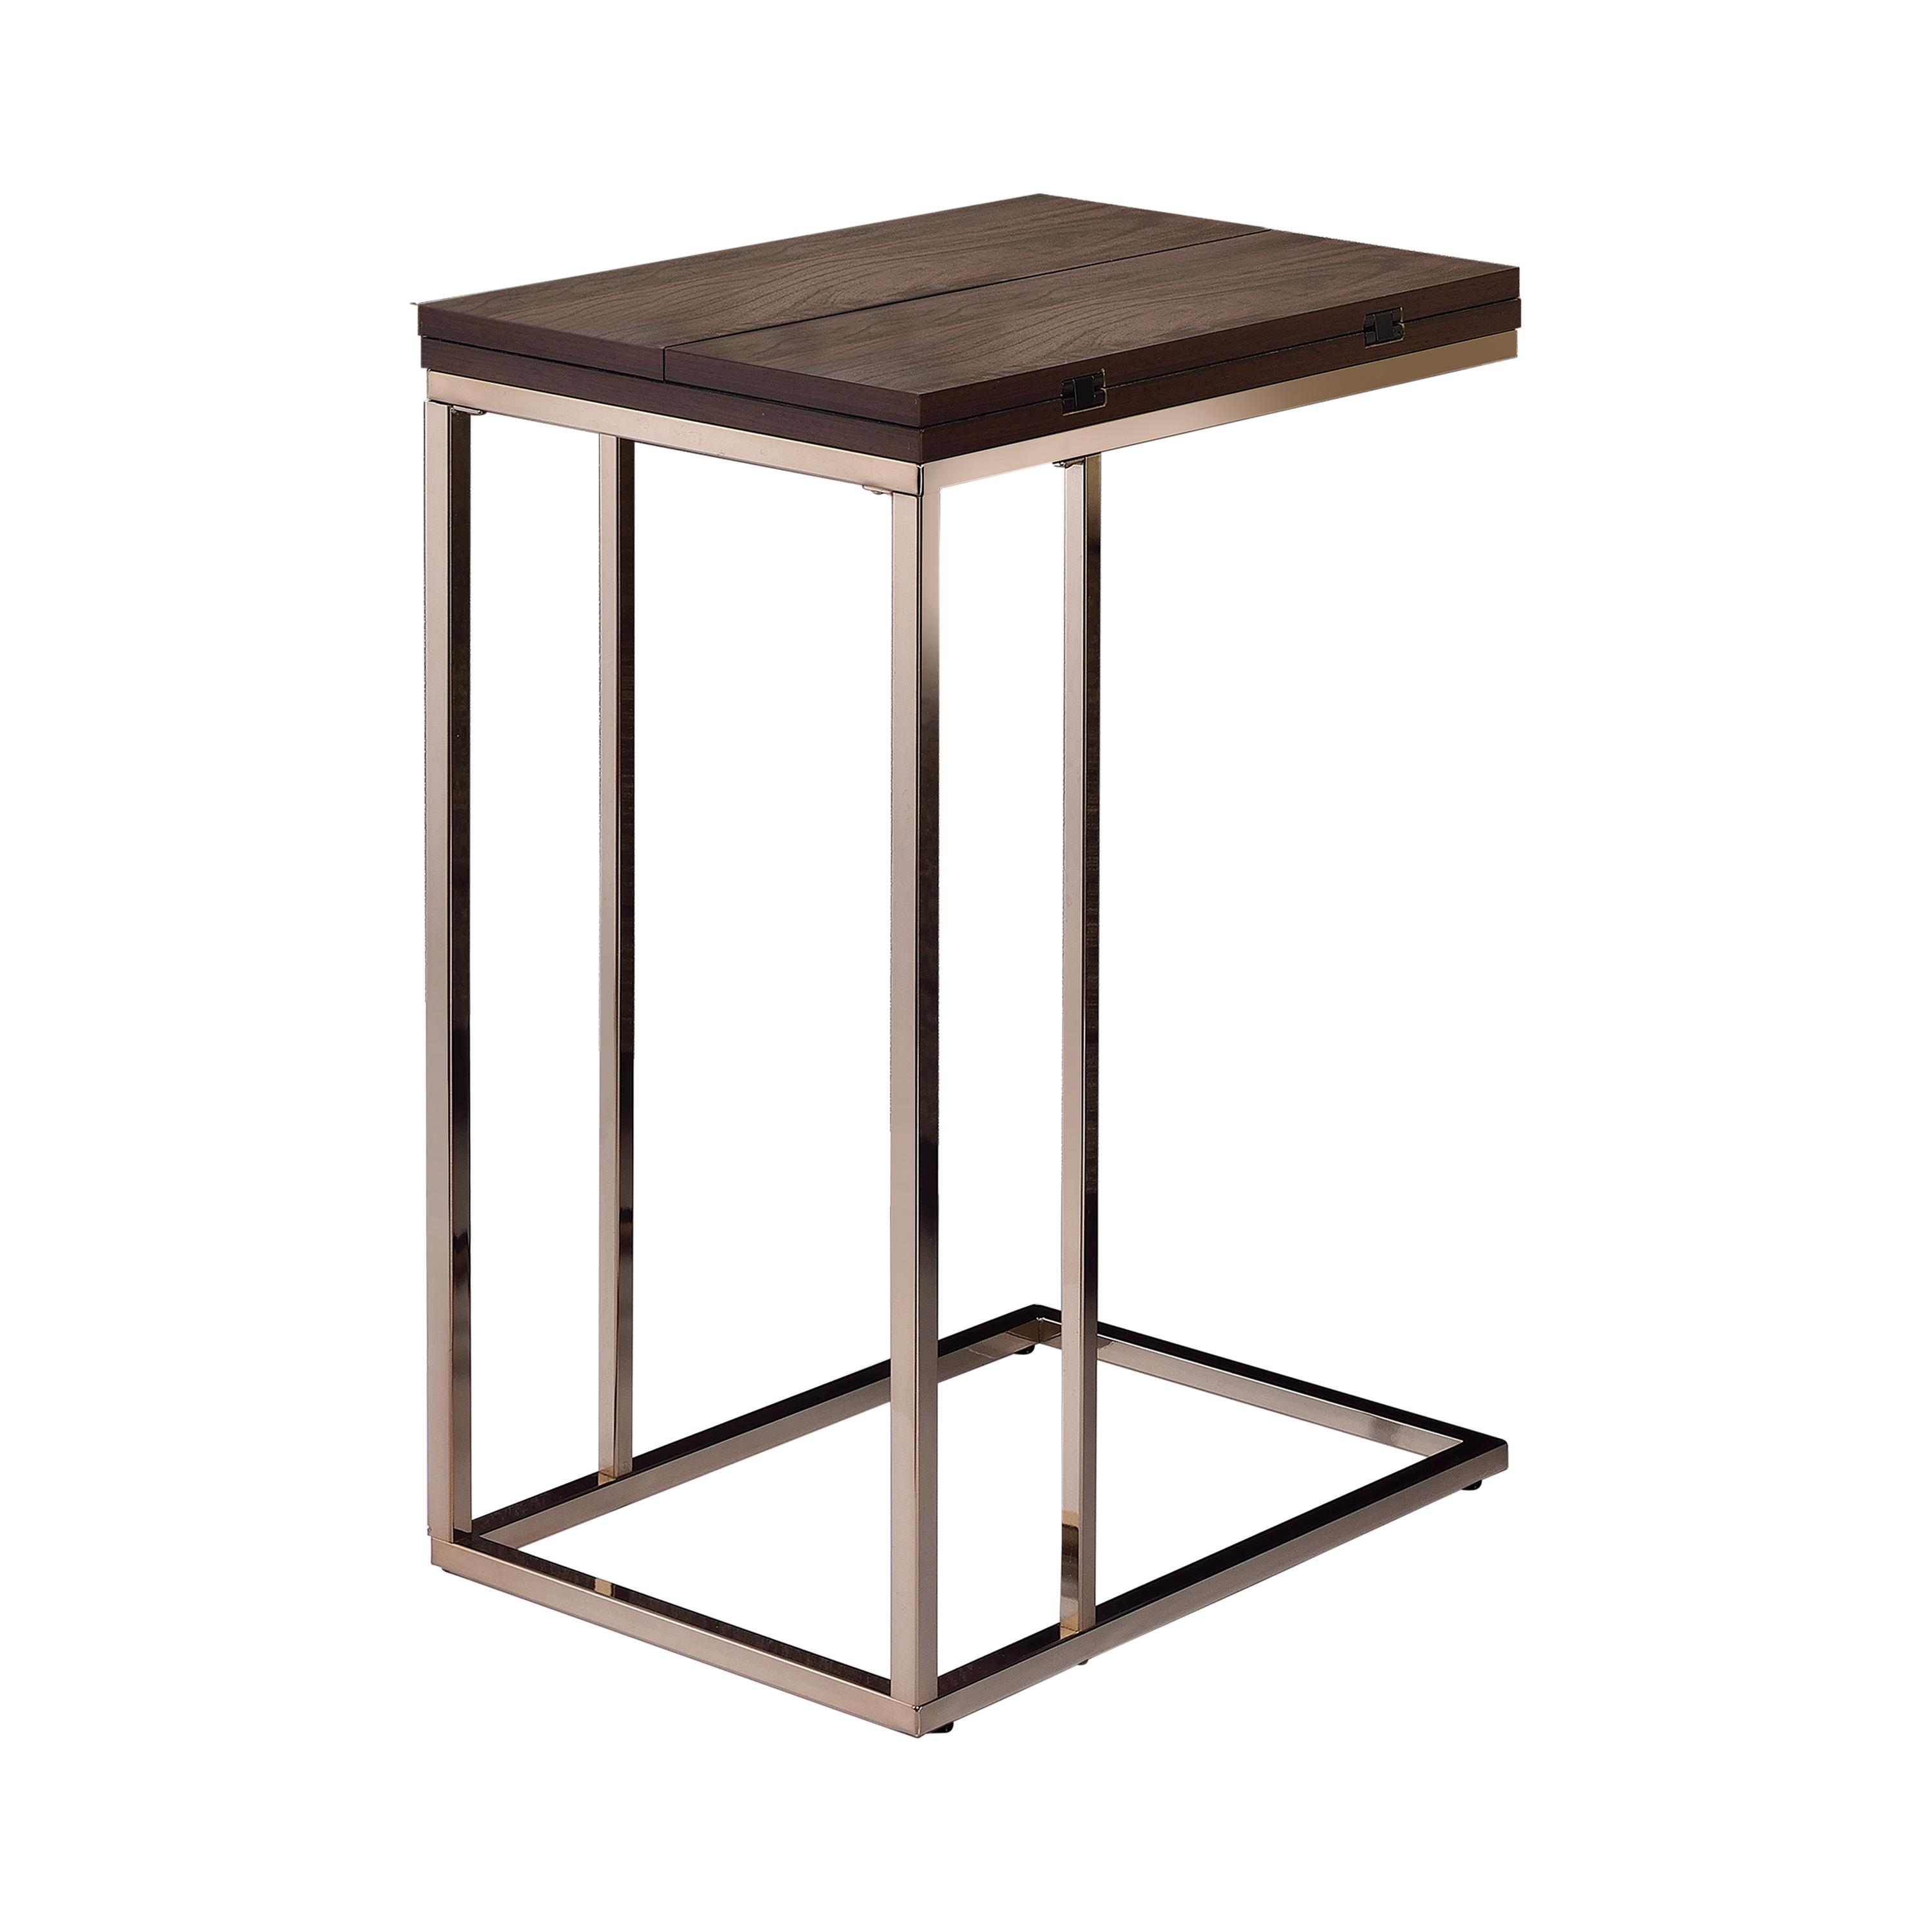 Contemporary Snack Table 902932 902932 in Chrome, Chestnut 